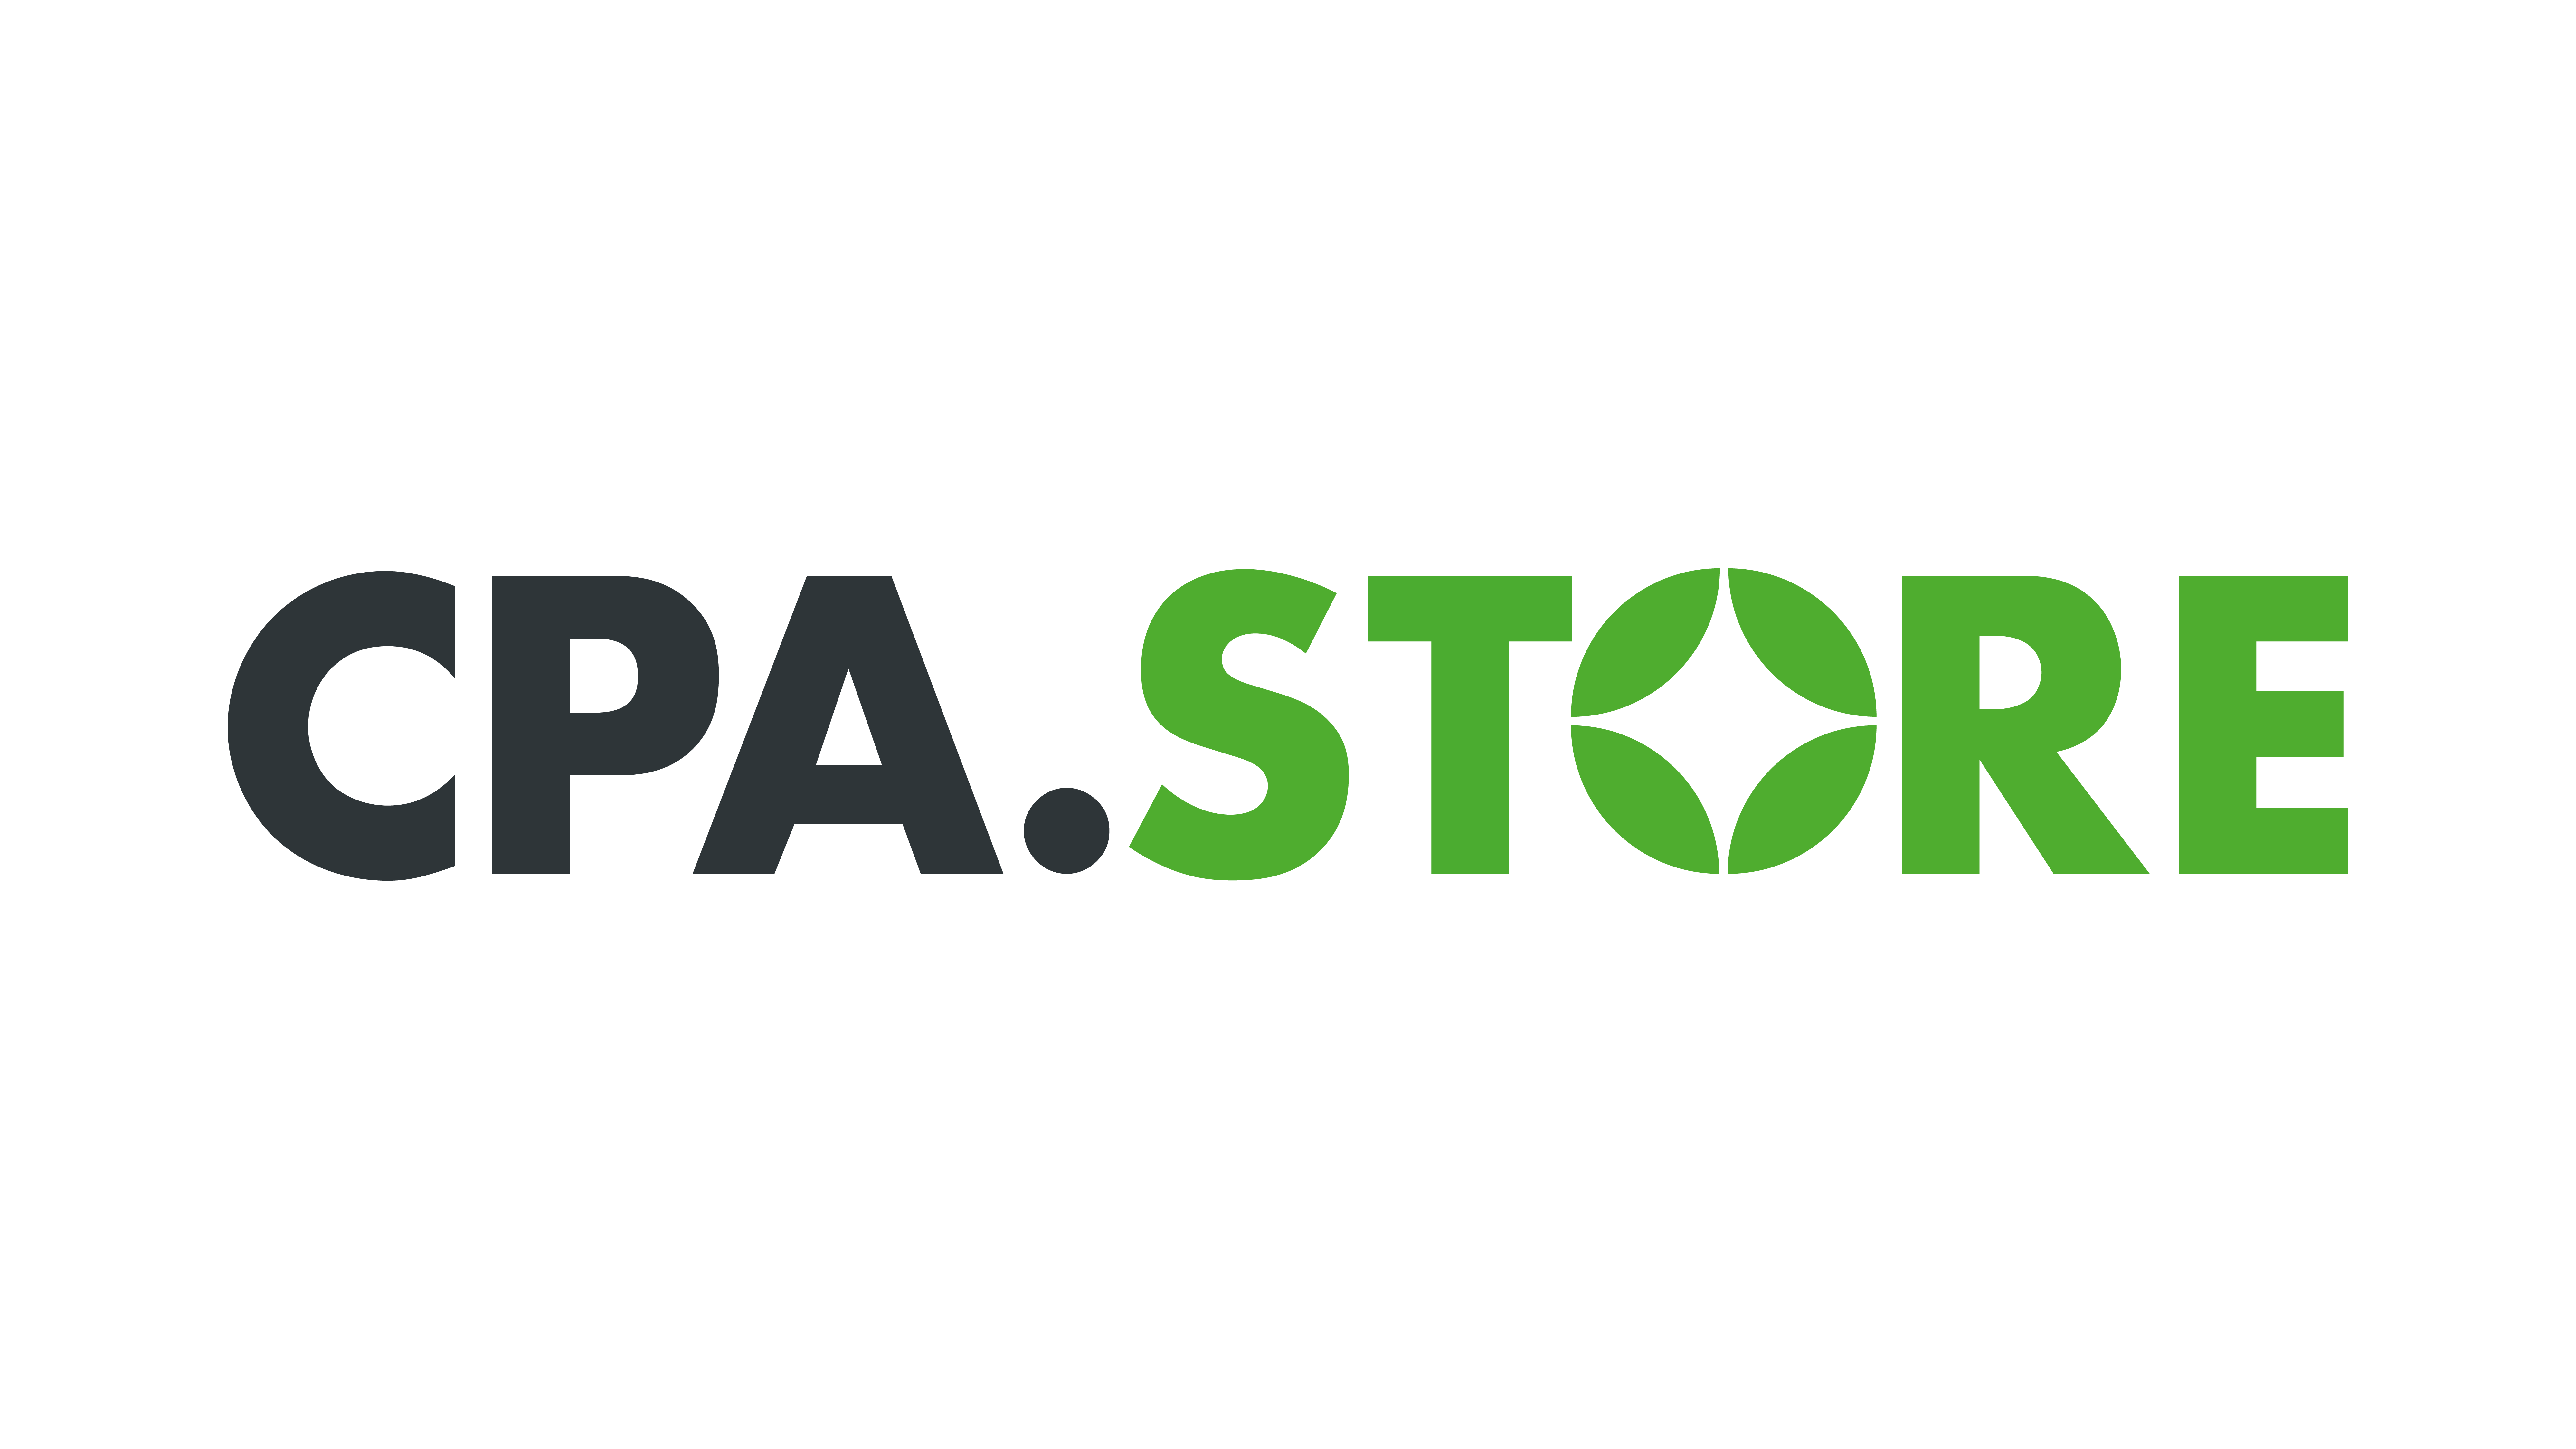 CPA.STORE